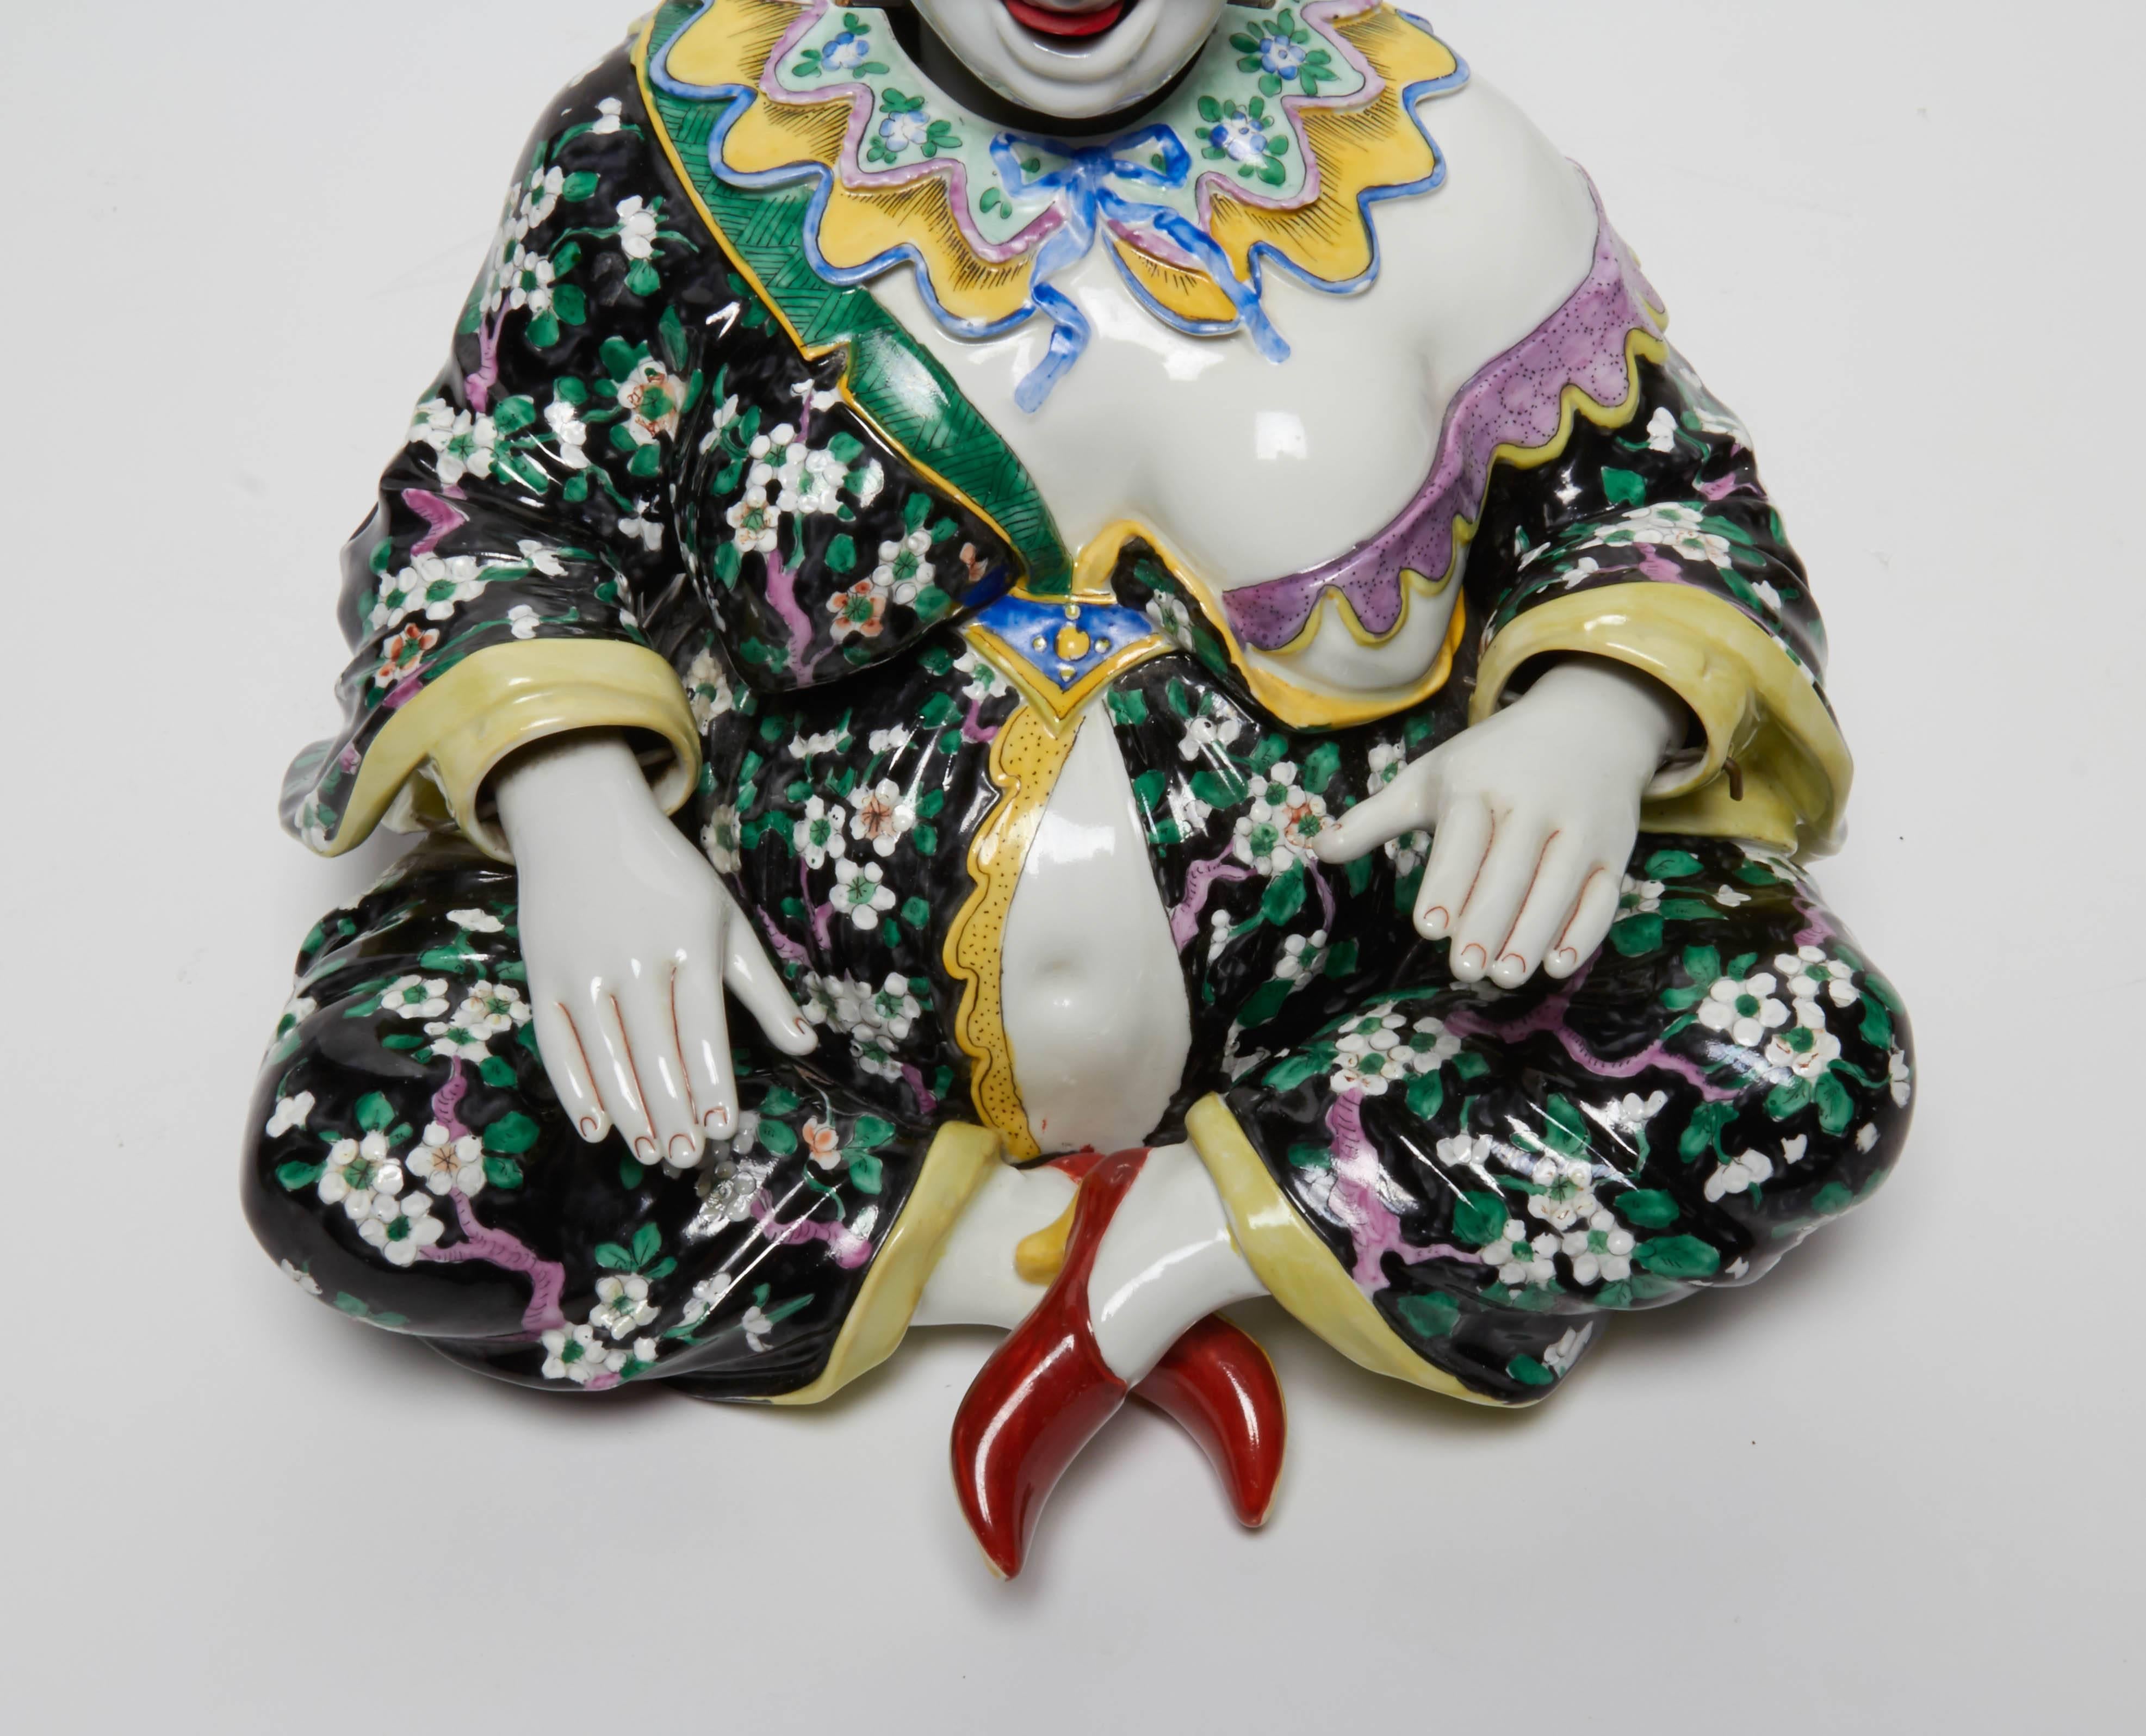 Chinoiserie German Porcelain Figure of a Nodder, Figure Seated Cross-Legged  For Sale 3